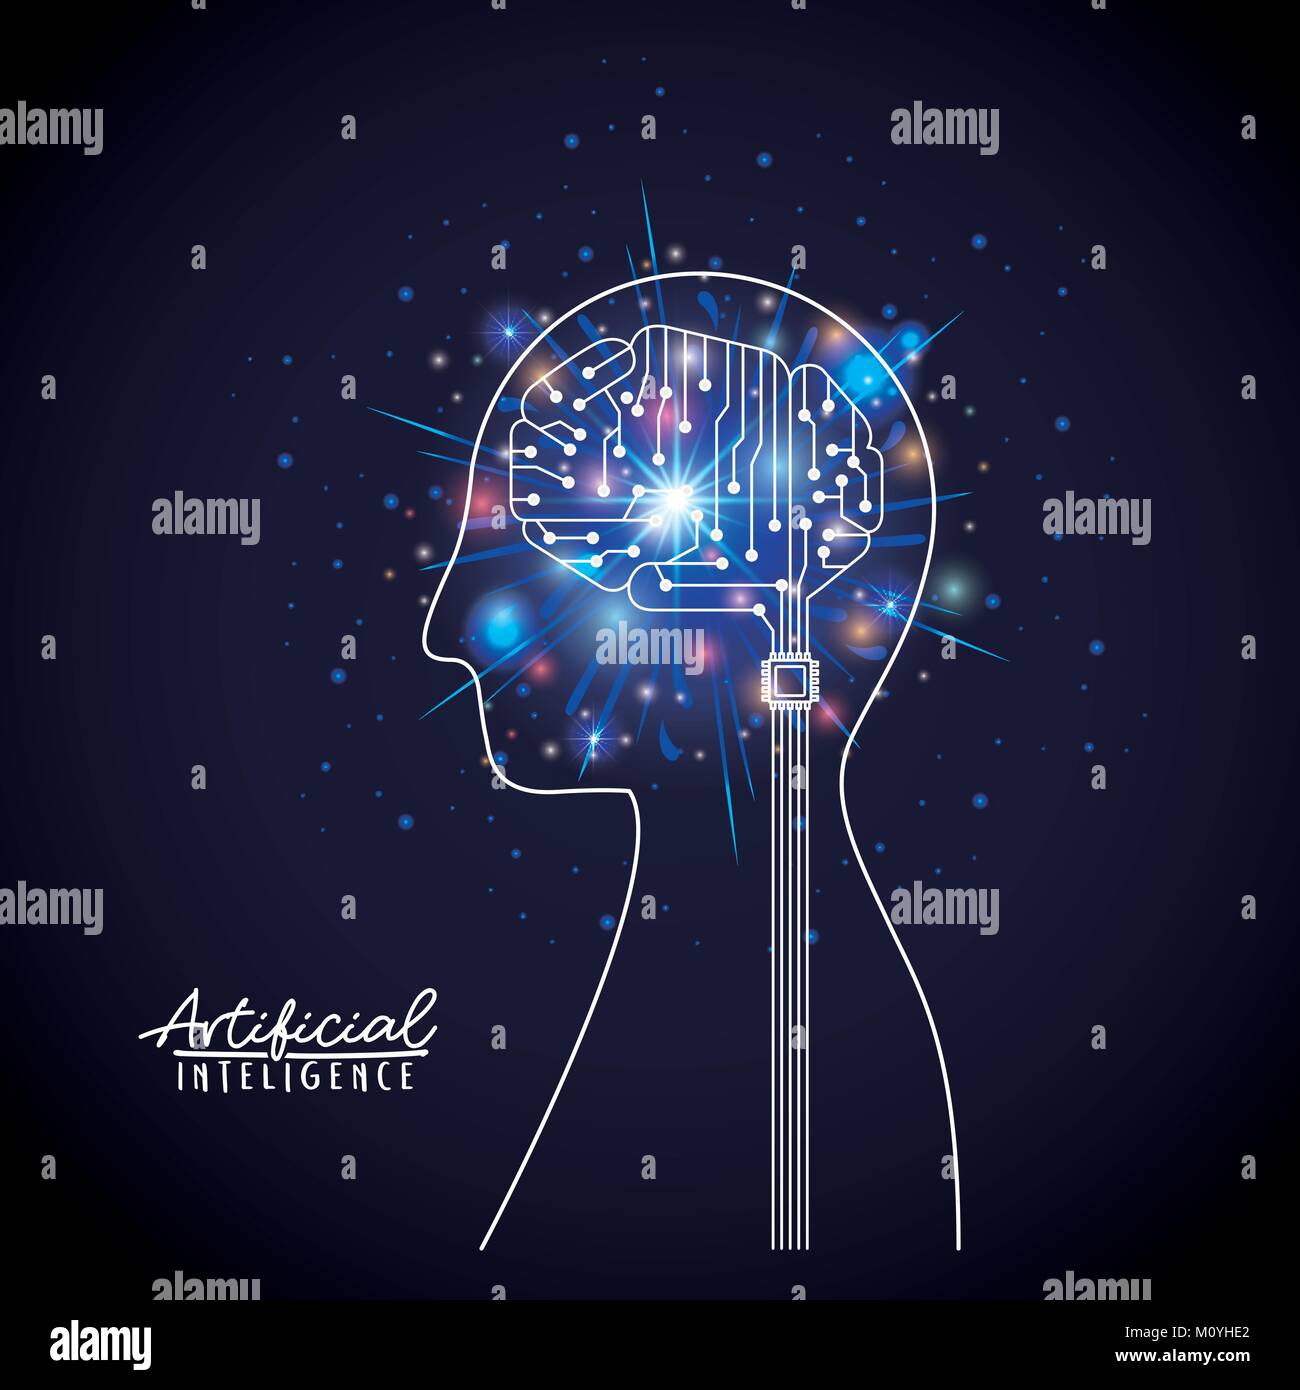 artificial intelligence poster with half body human silhouette with hybrid brain in transparency over dark blue background with sparkles Stock Vector